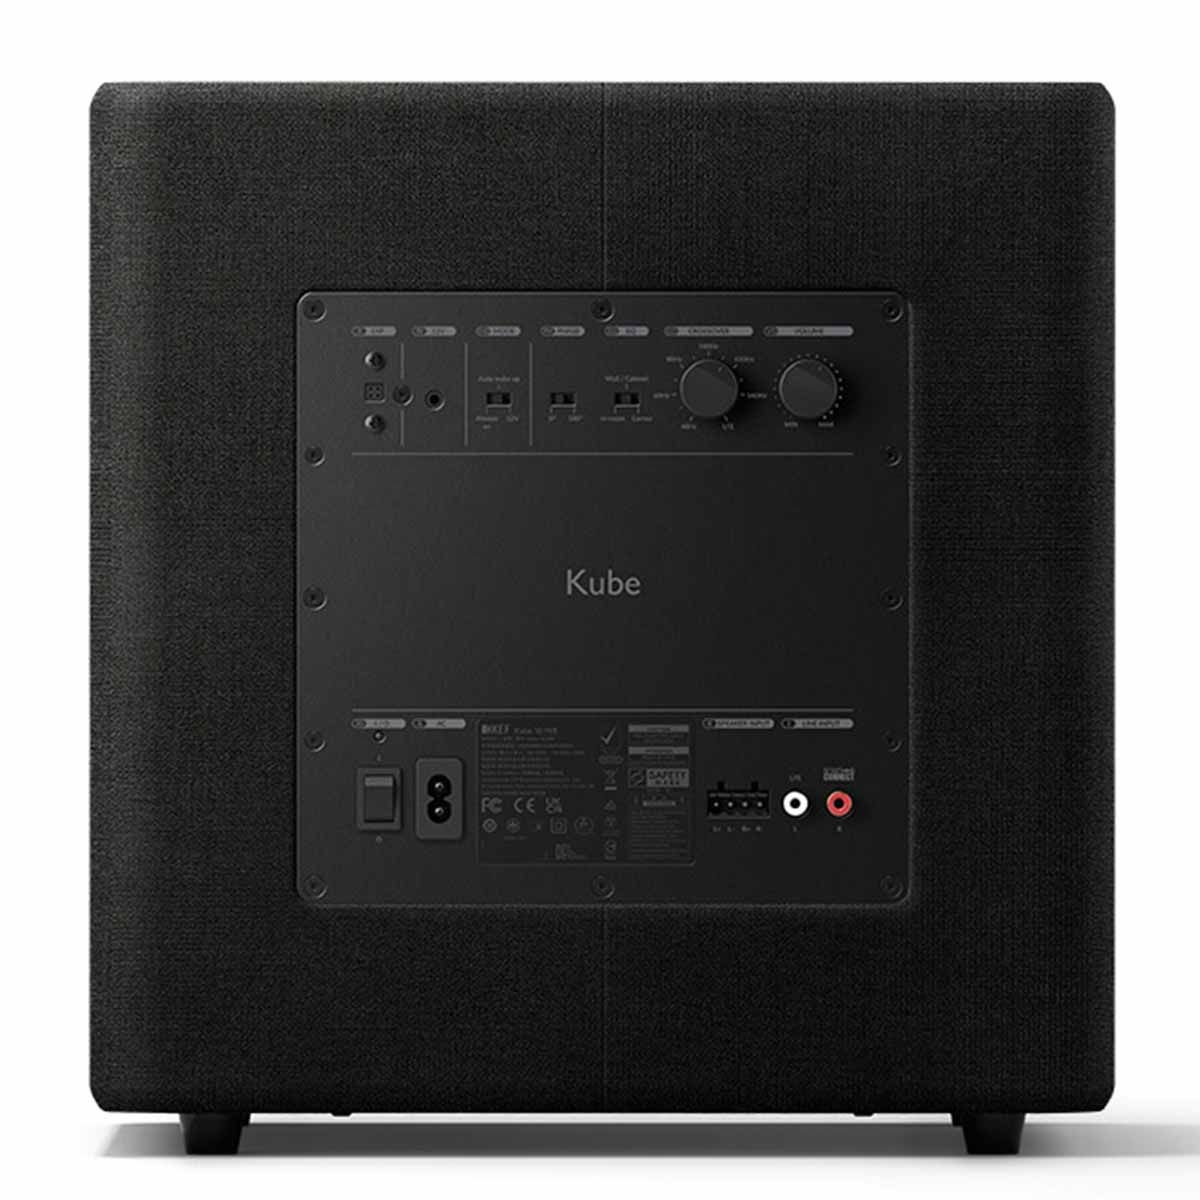 KEF Kube 10 MIE Subwoofer - Black rear view